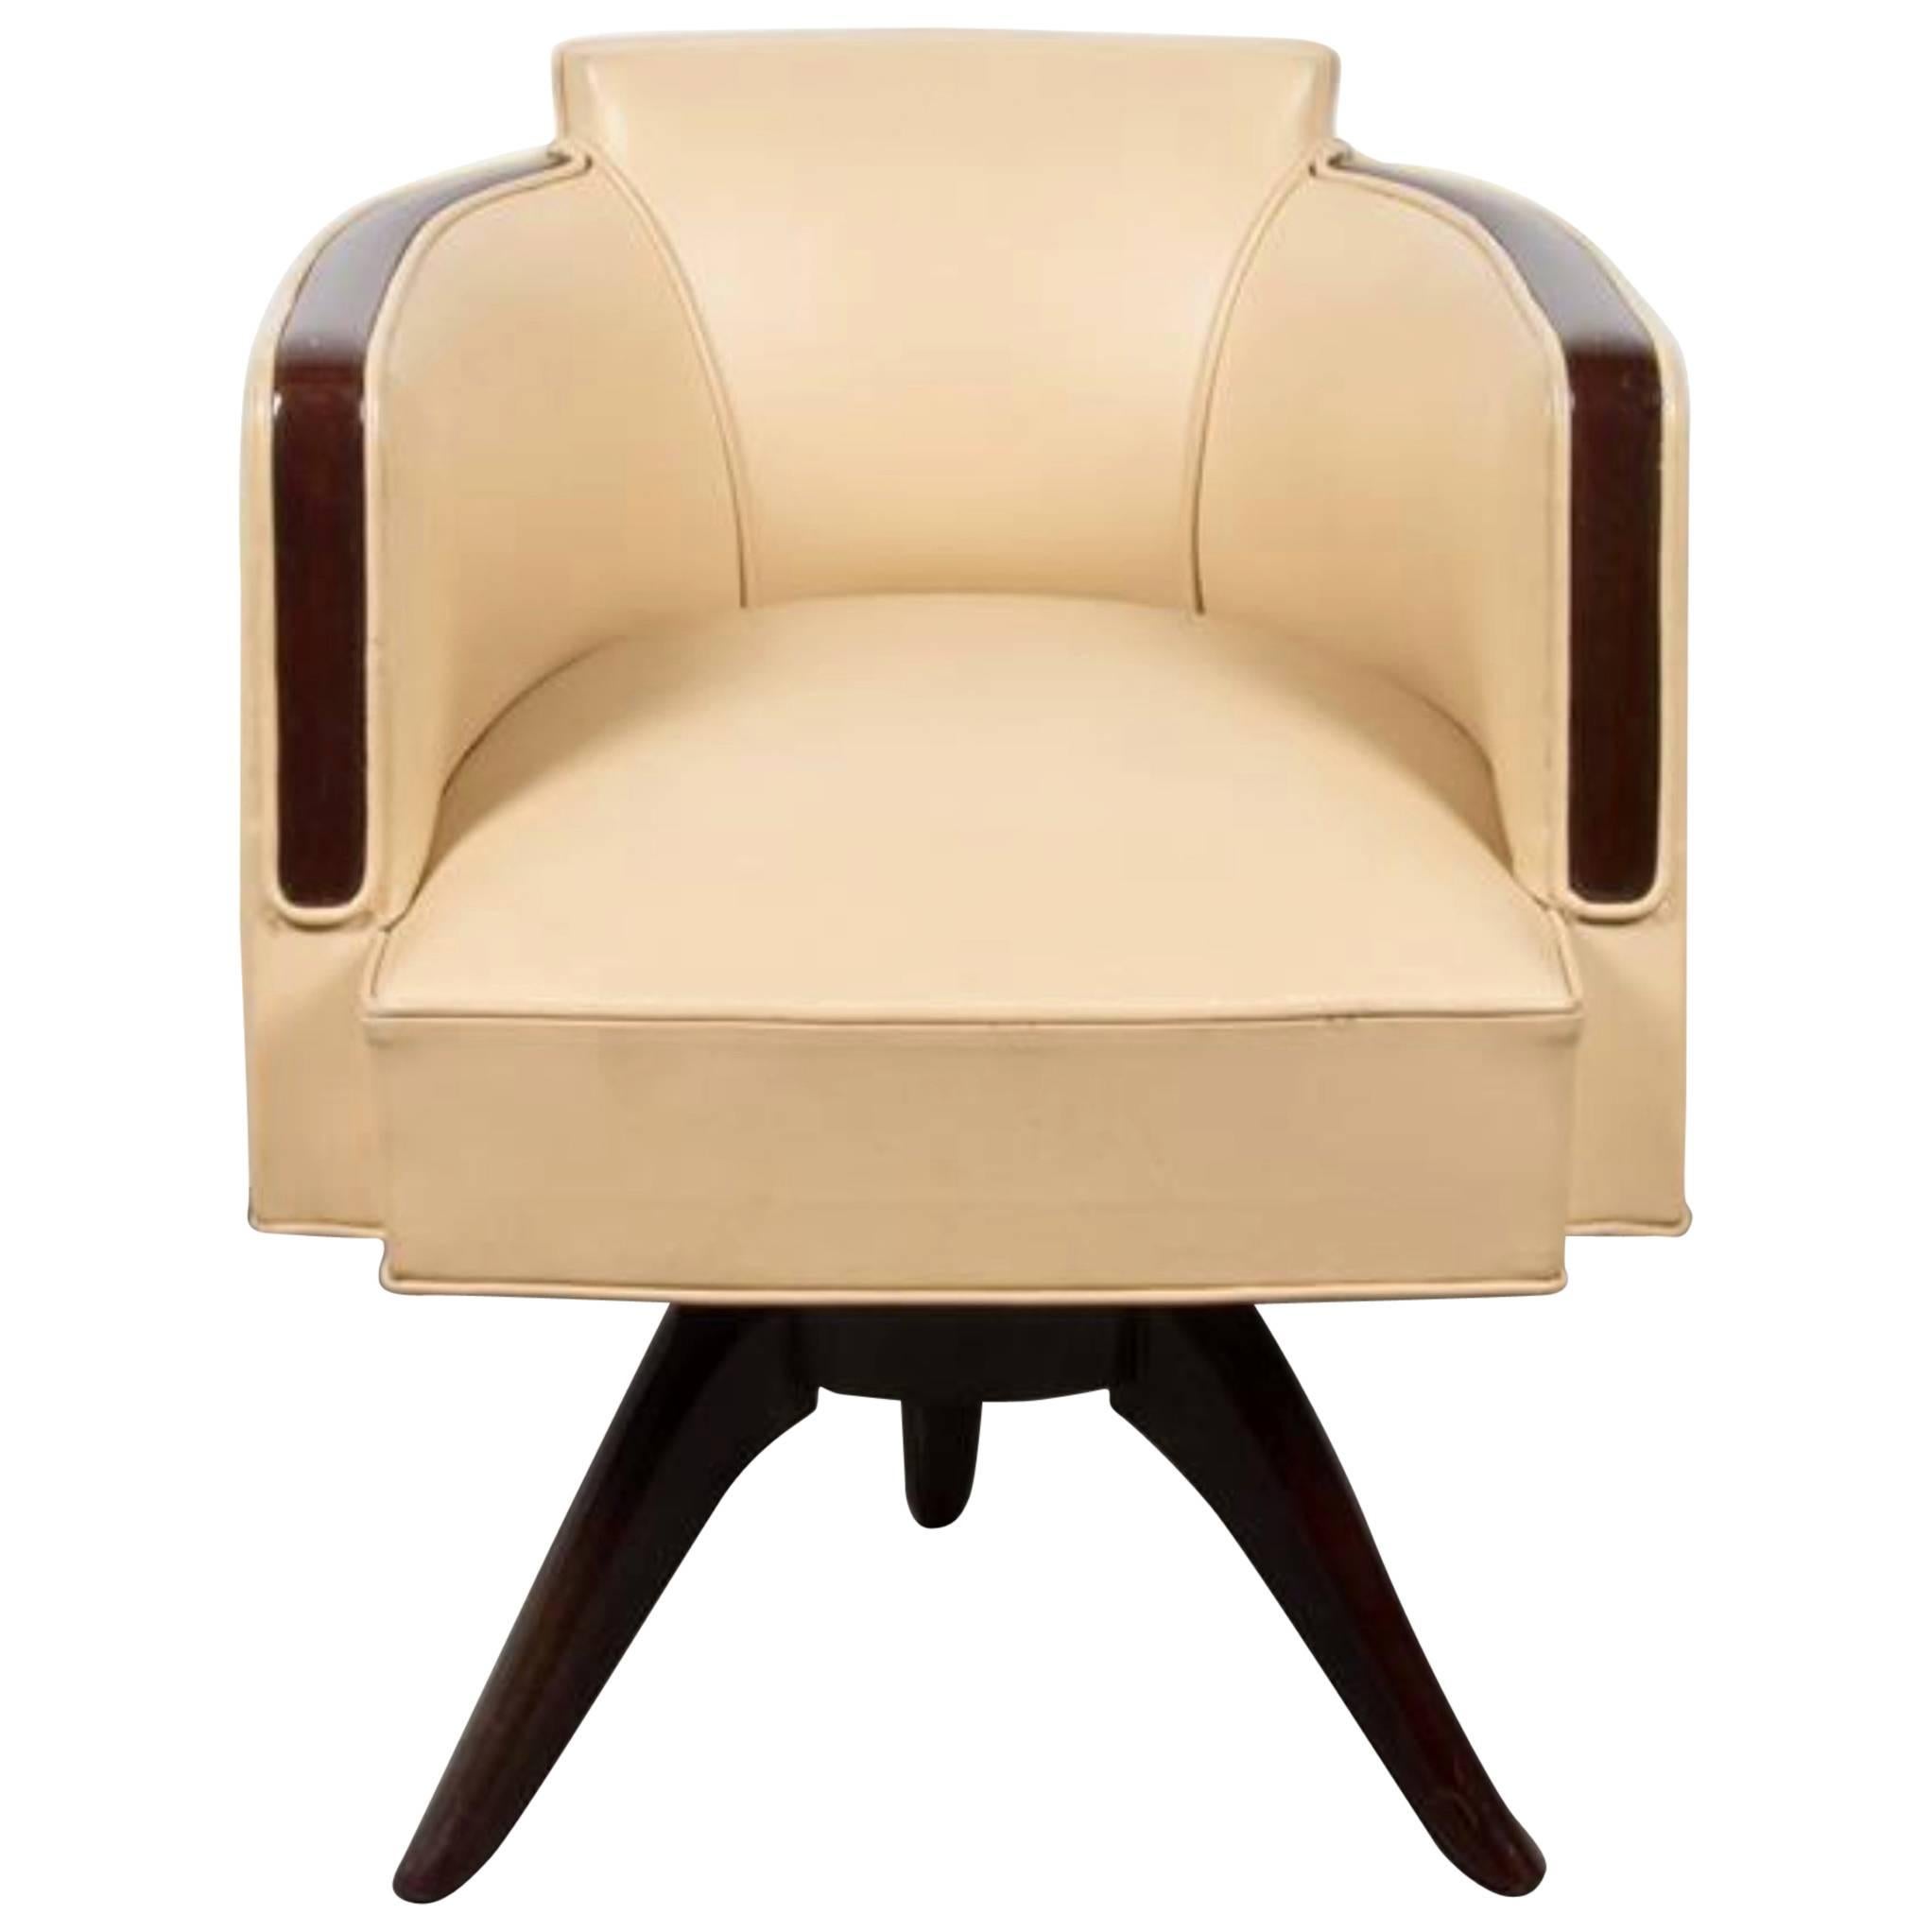 Very Chic Art Deco Style Armchair or Desk Chair